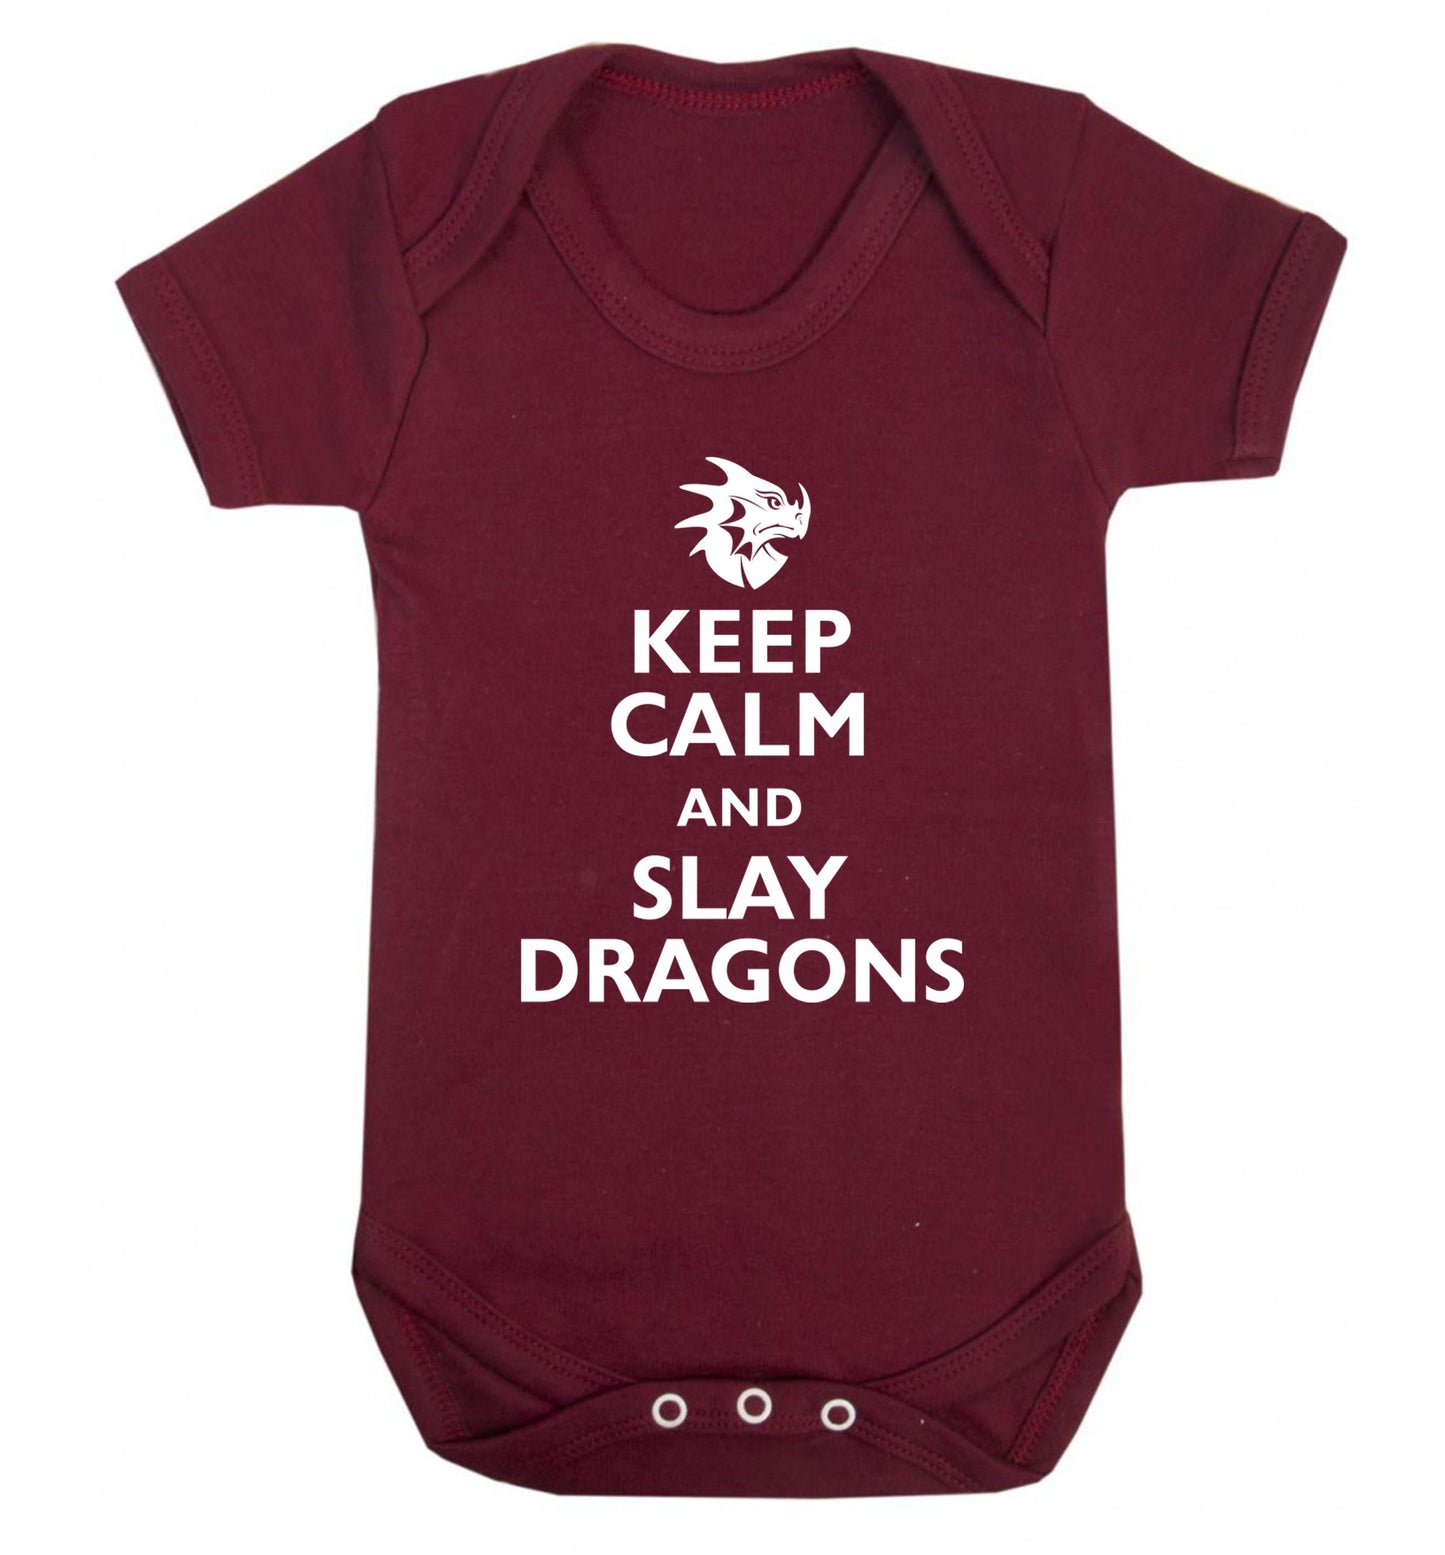 Keep calm and slay dragons Baby Vest maroon 18-24 months